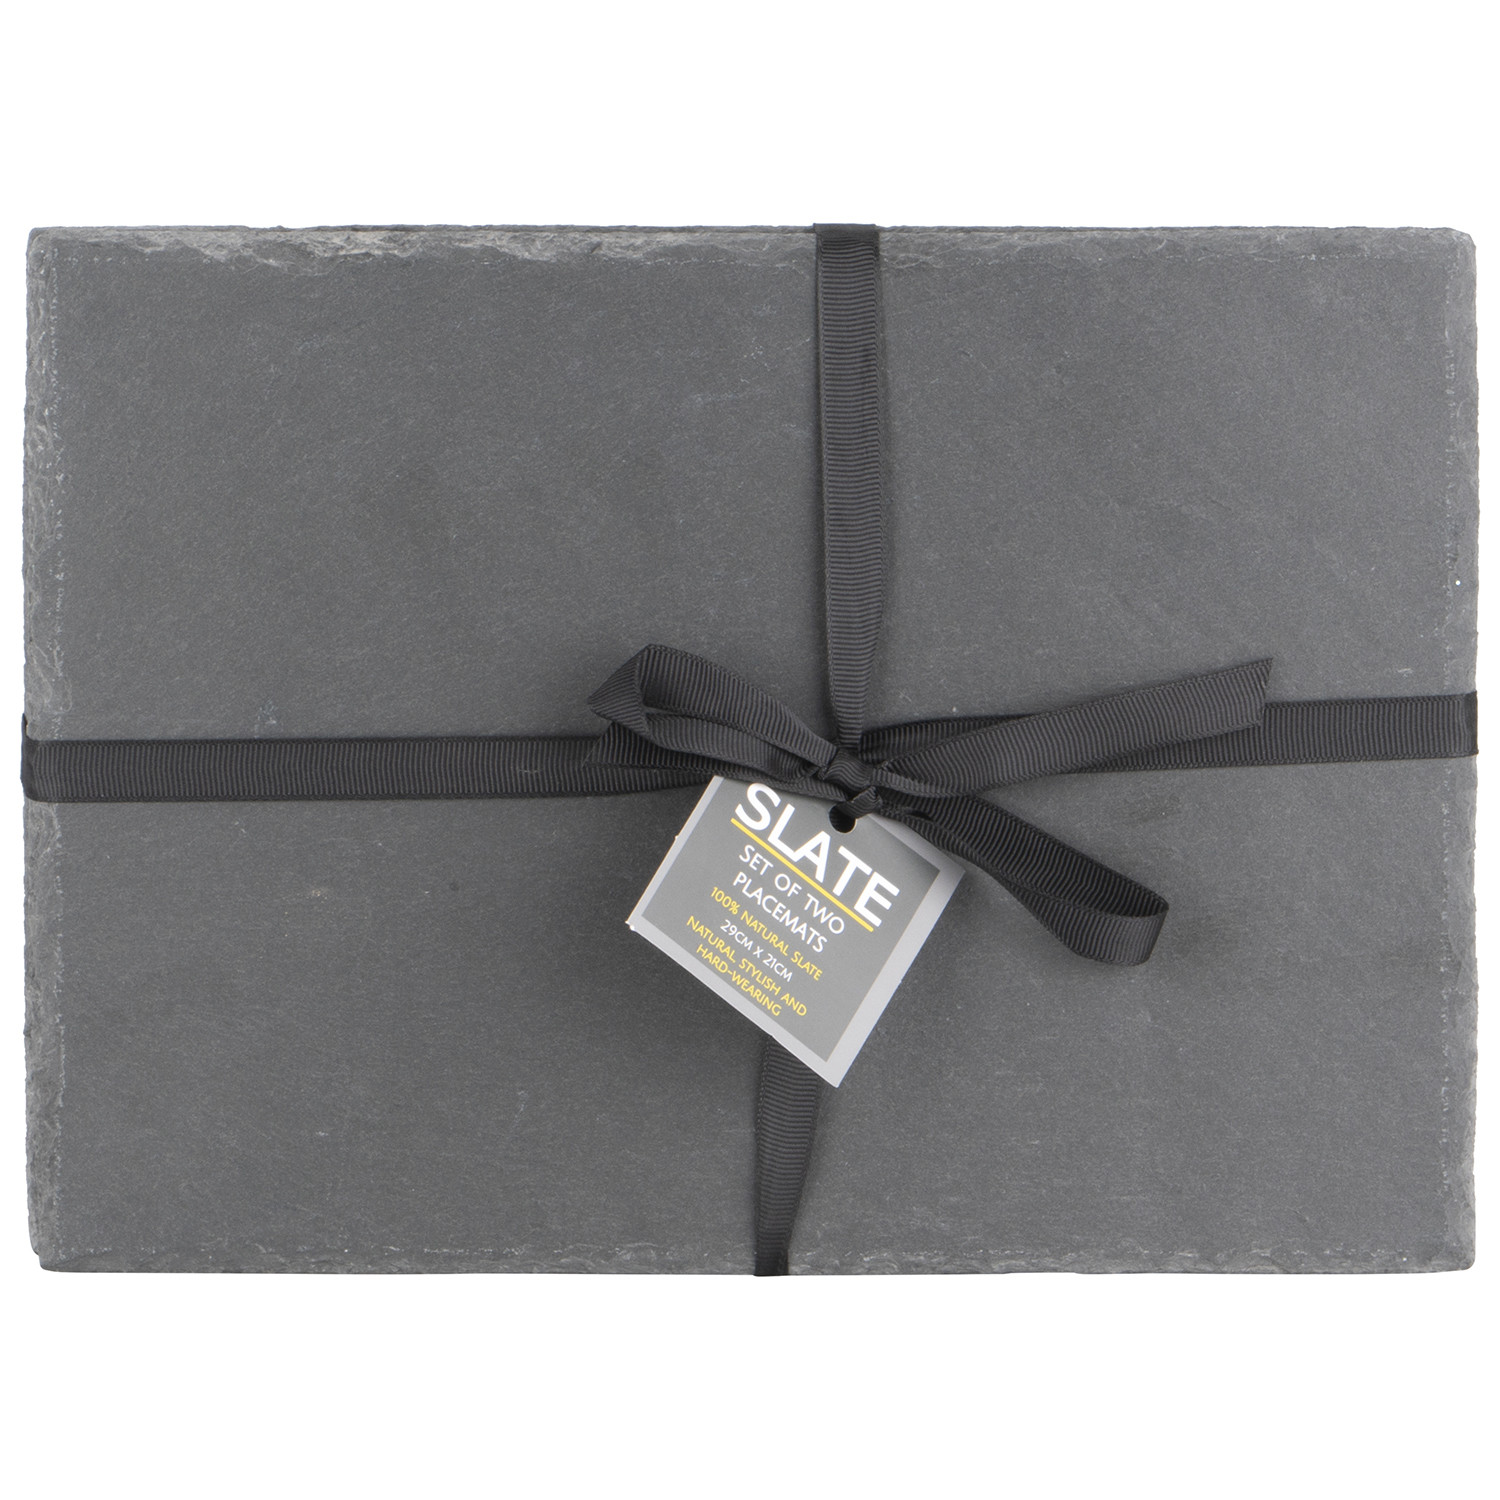  Slate Black Rough Edge Placemats 2 Pack Image 2